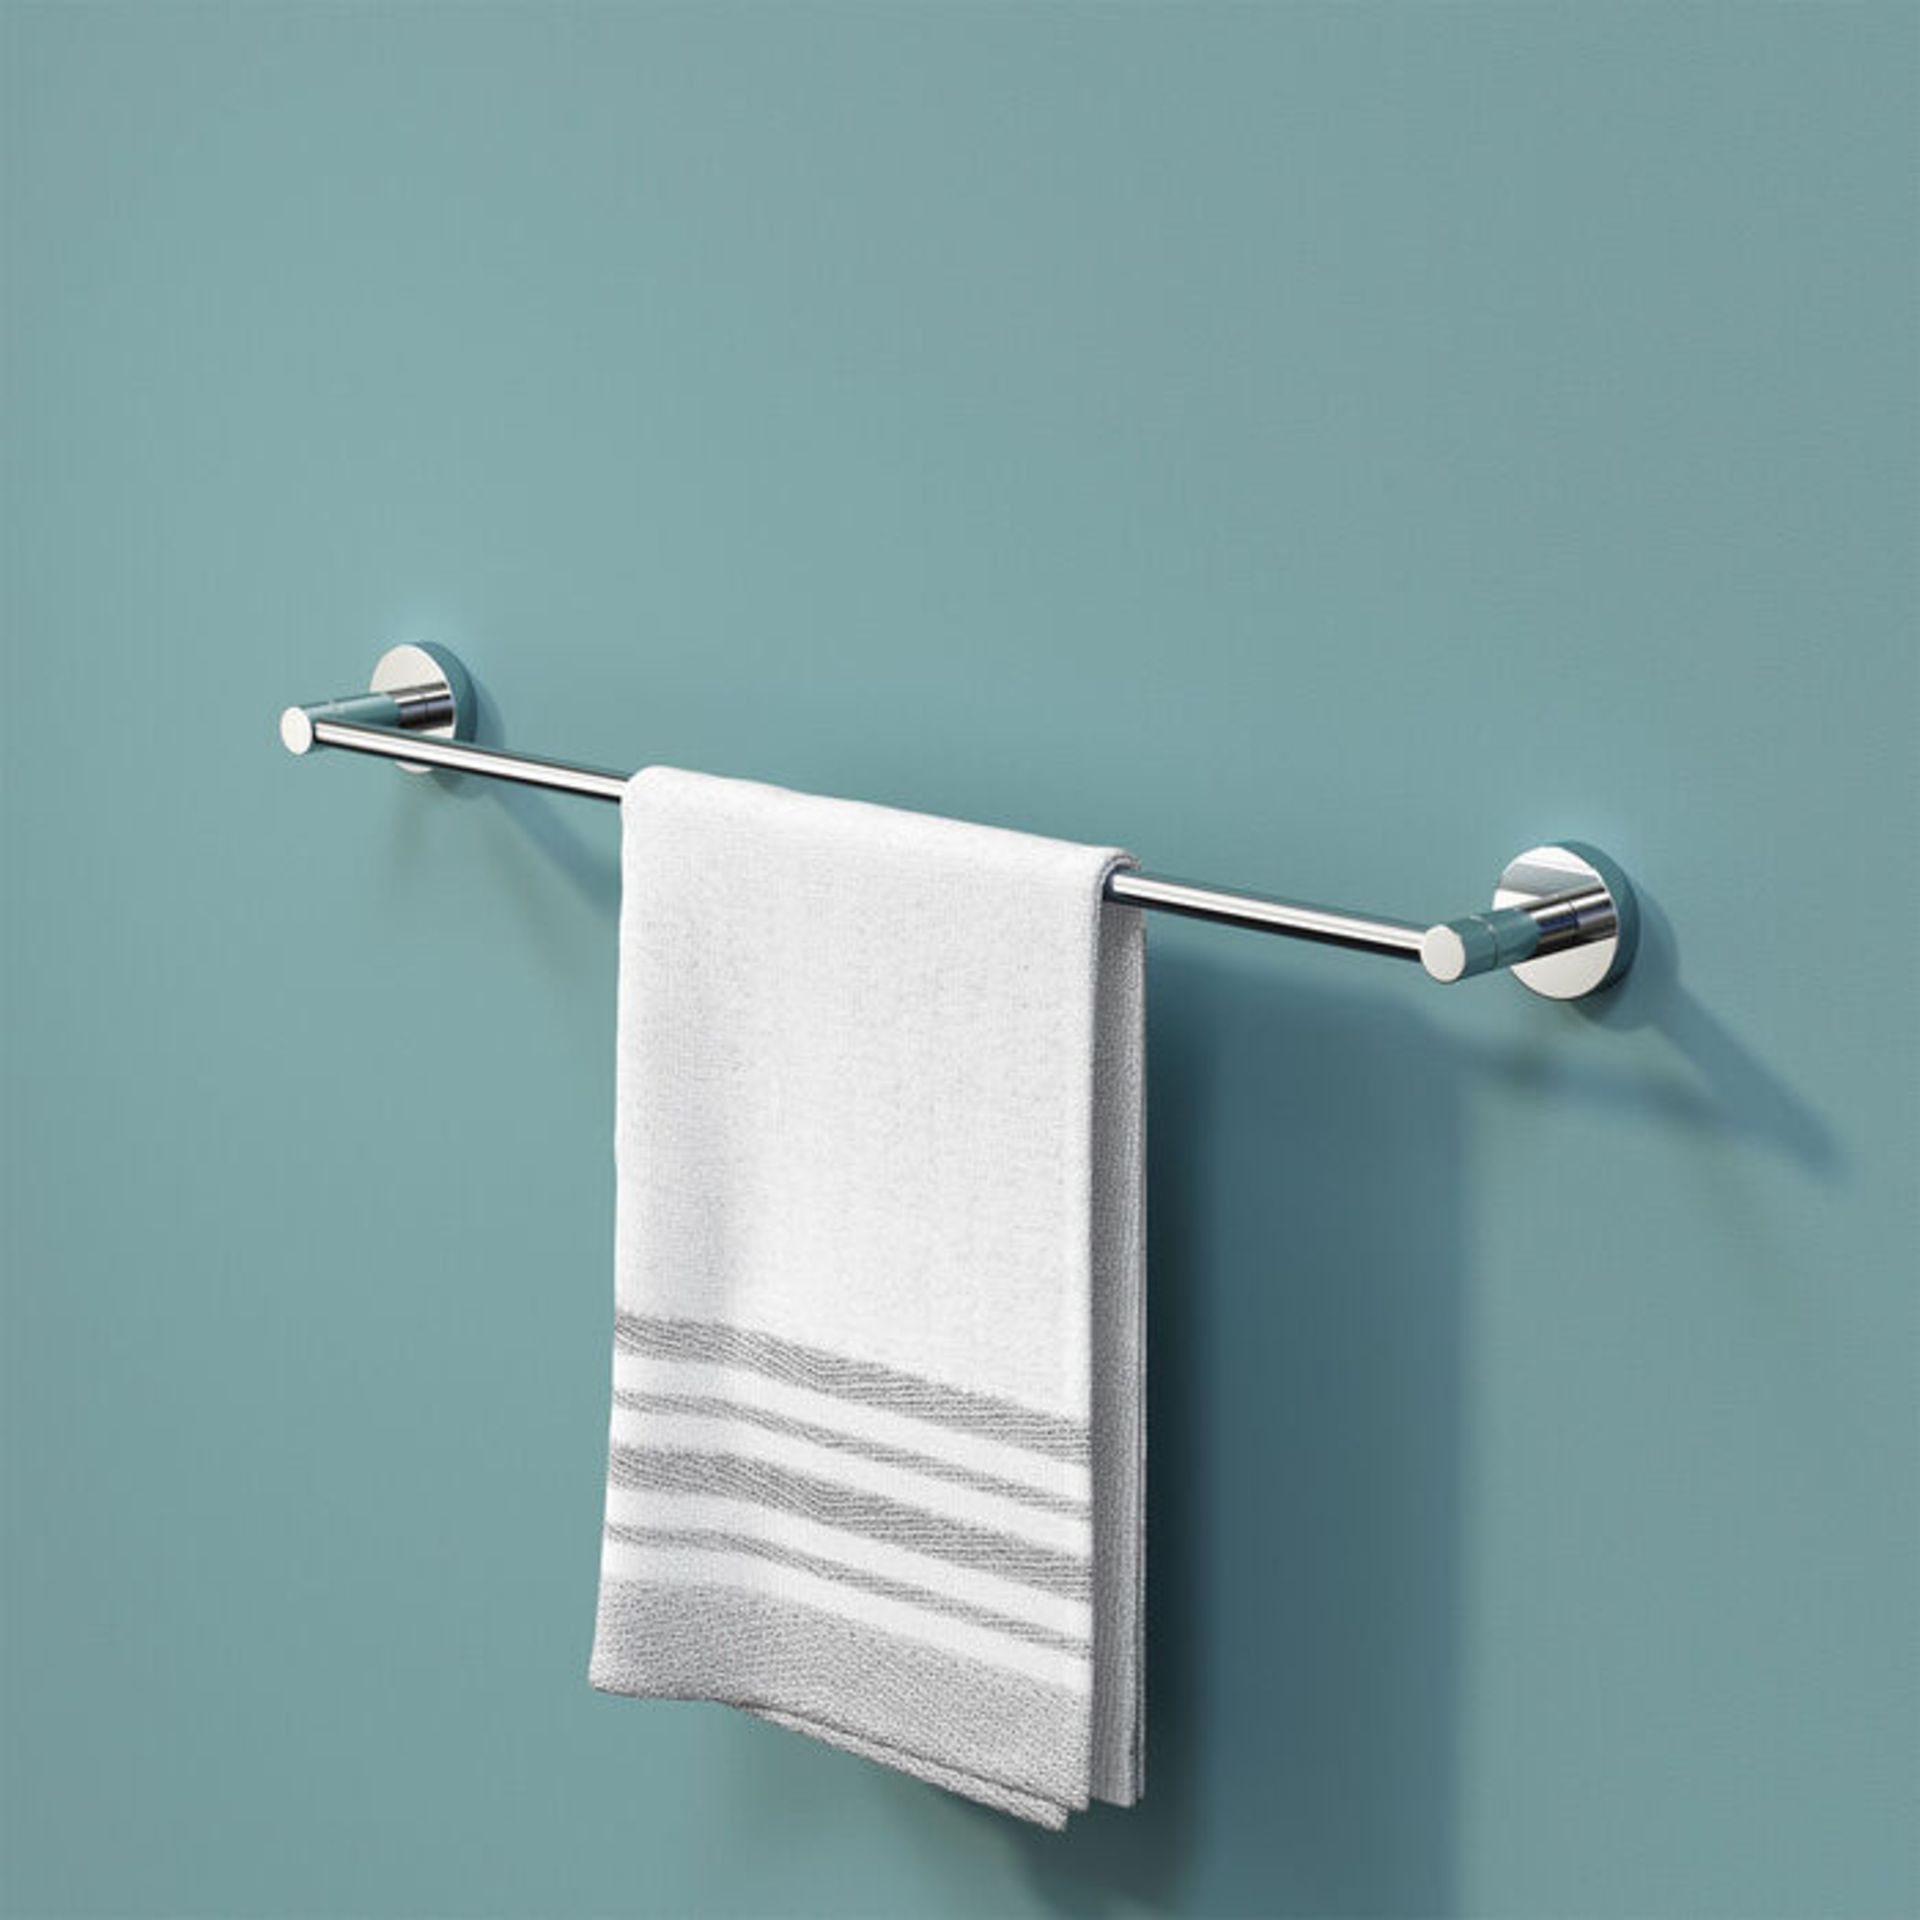 (Z1000) Finsbury Towel Rail. Designed to conceal all fittings Completes your bathroom with a l...